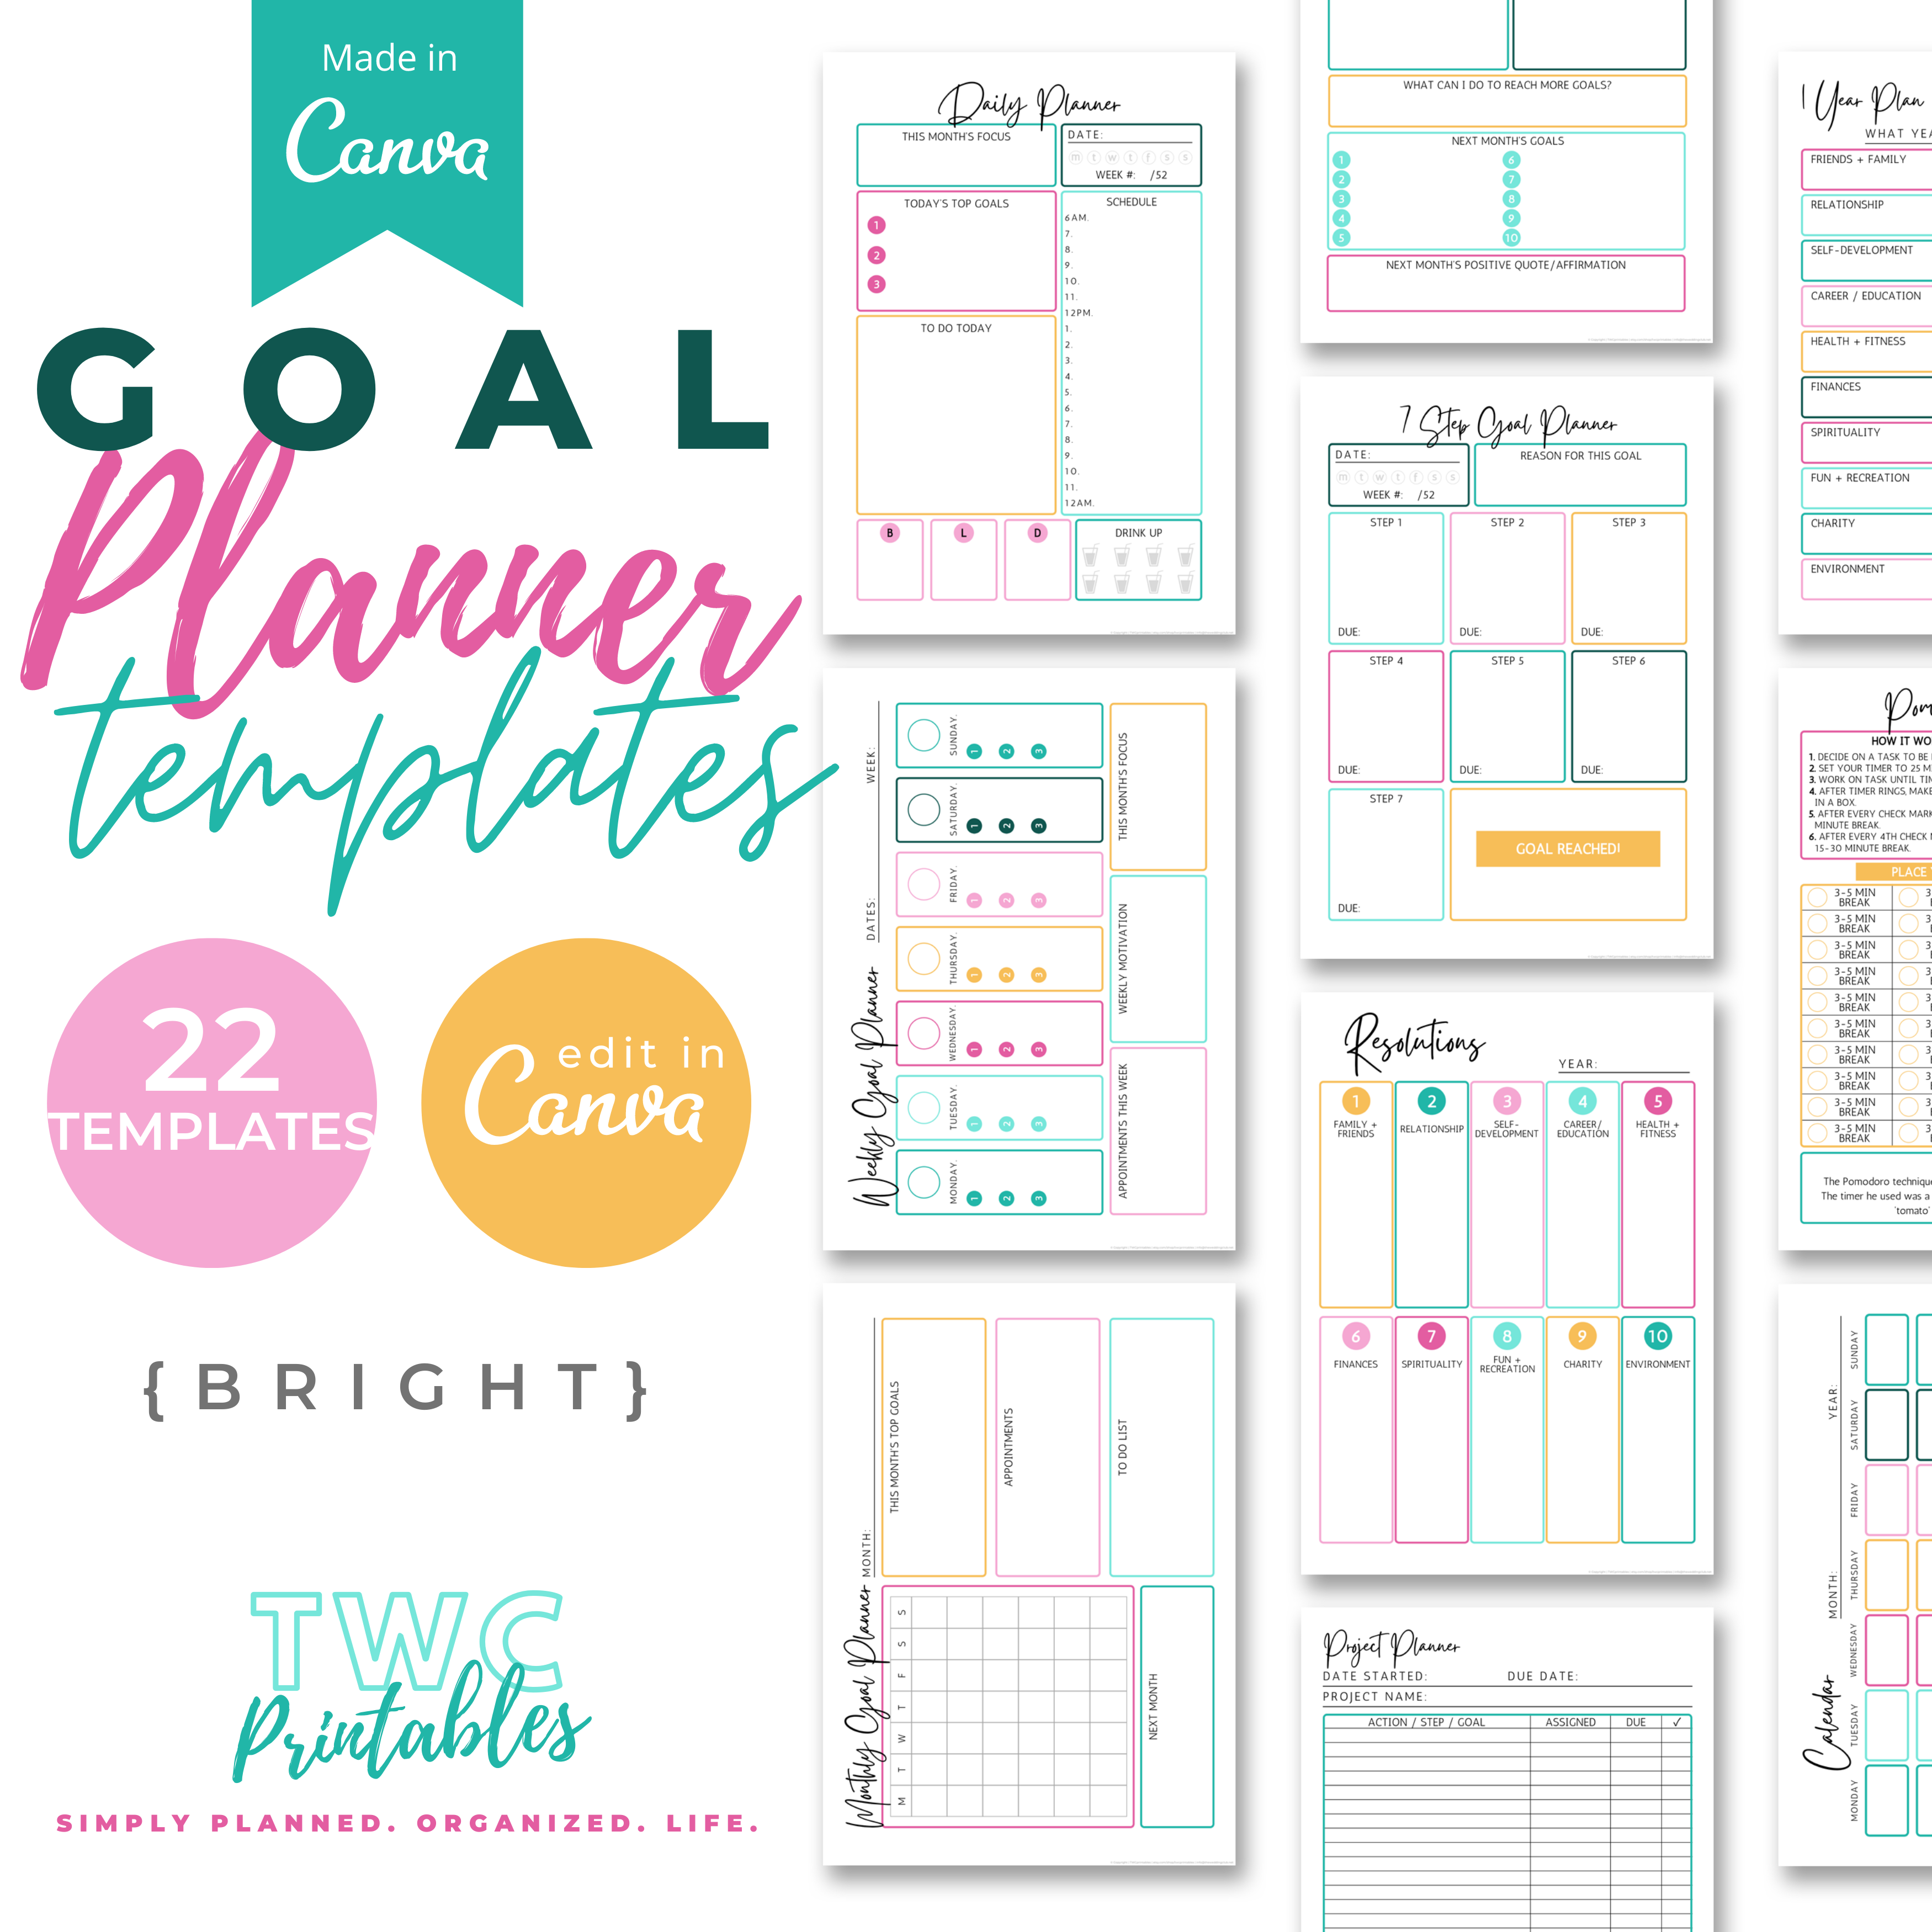 Set your goals and achieve them with these editable goal planner templates for Canva! Creating planner sheets from scratch takes so much time, and possibly money. These editable planner sheets will make it easier to create the sheets you really need to plan out your goals, resolutions, and priorities. Stay productive and get things done with the productivity planner sheets that are also included.